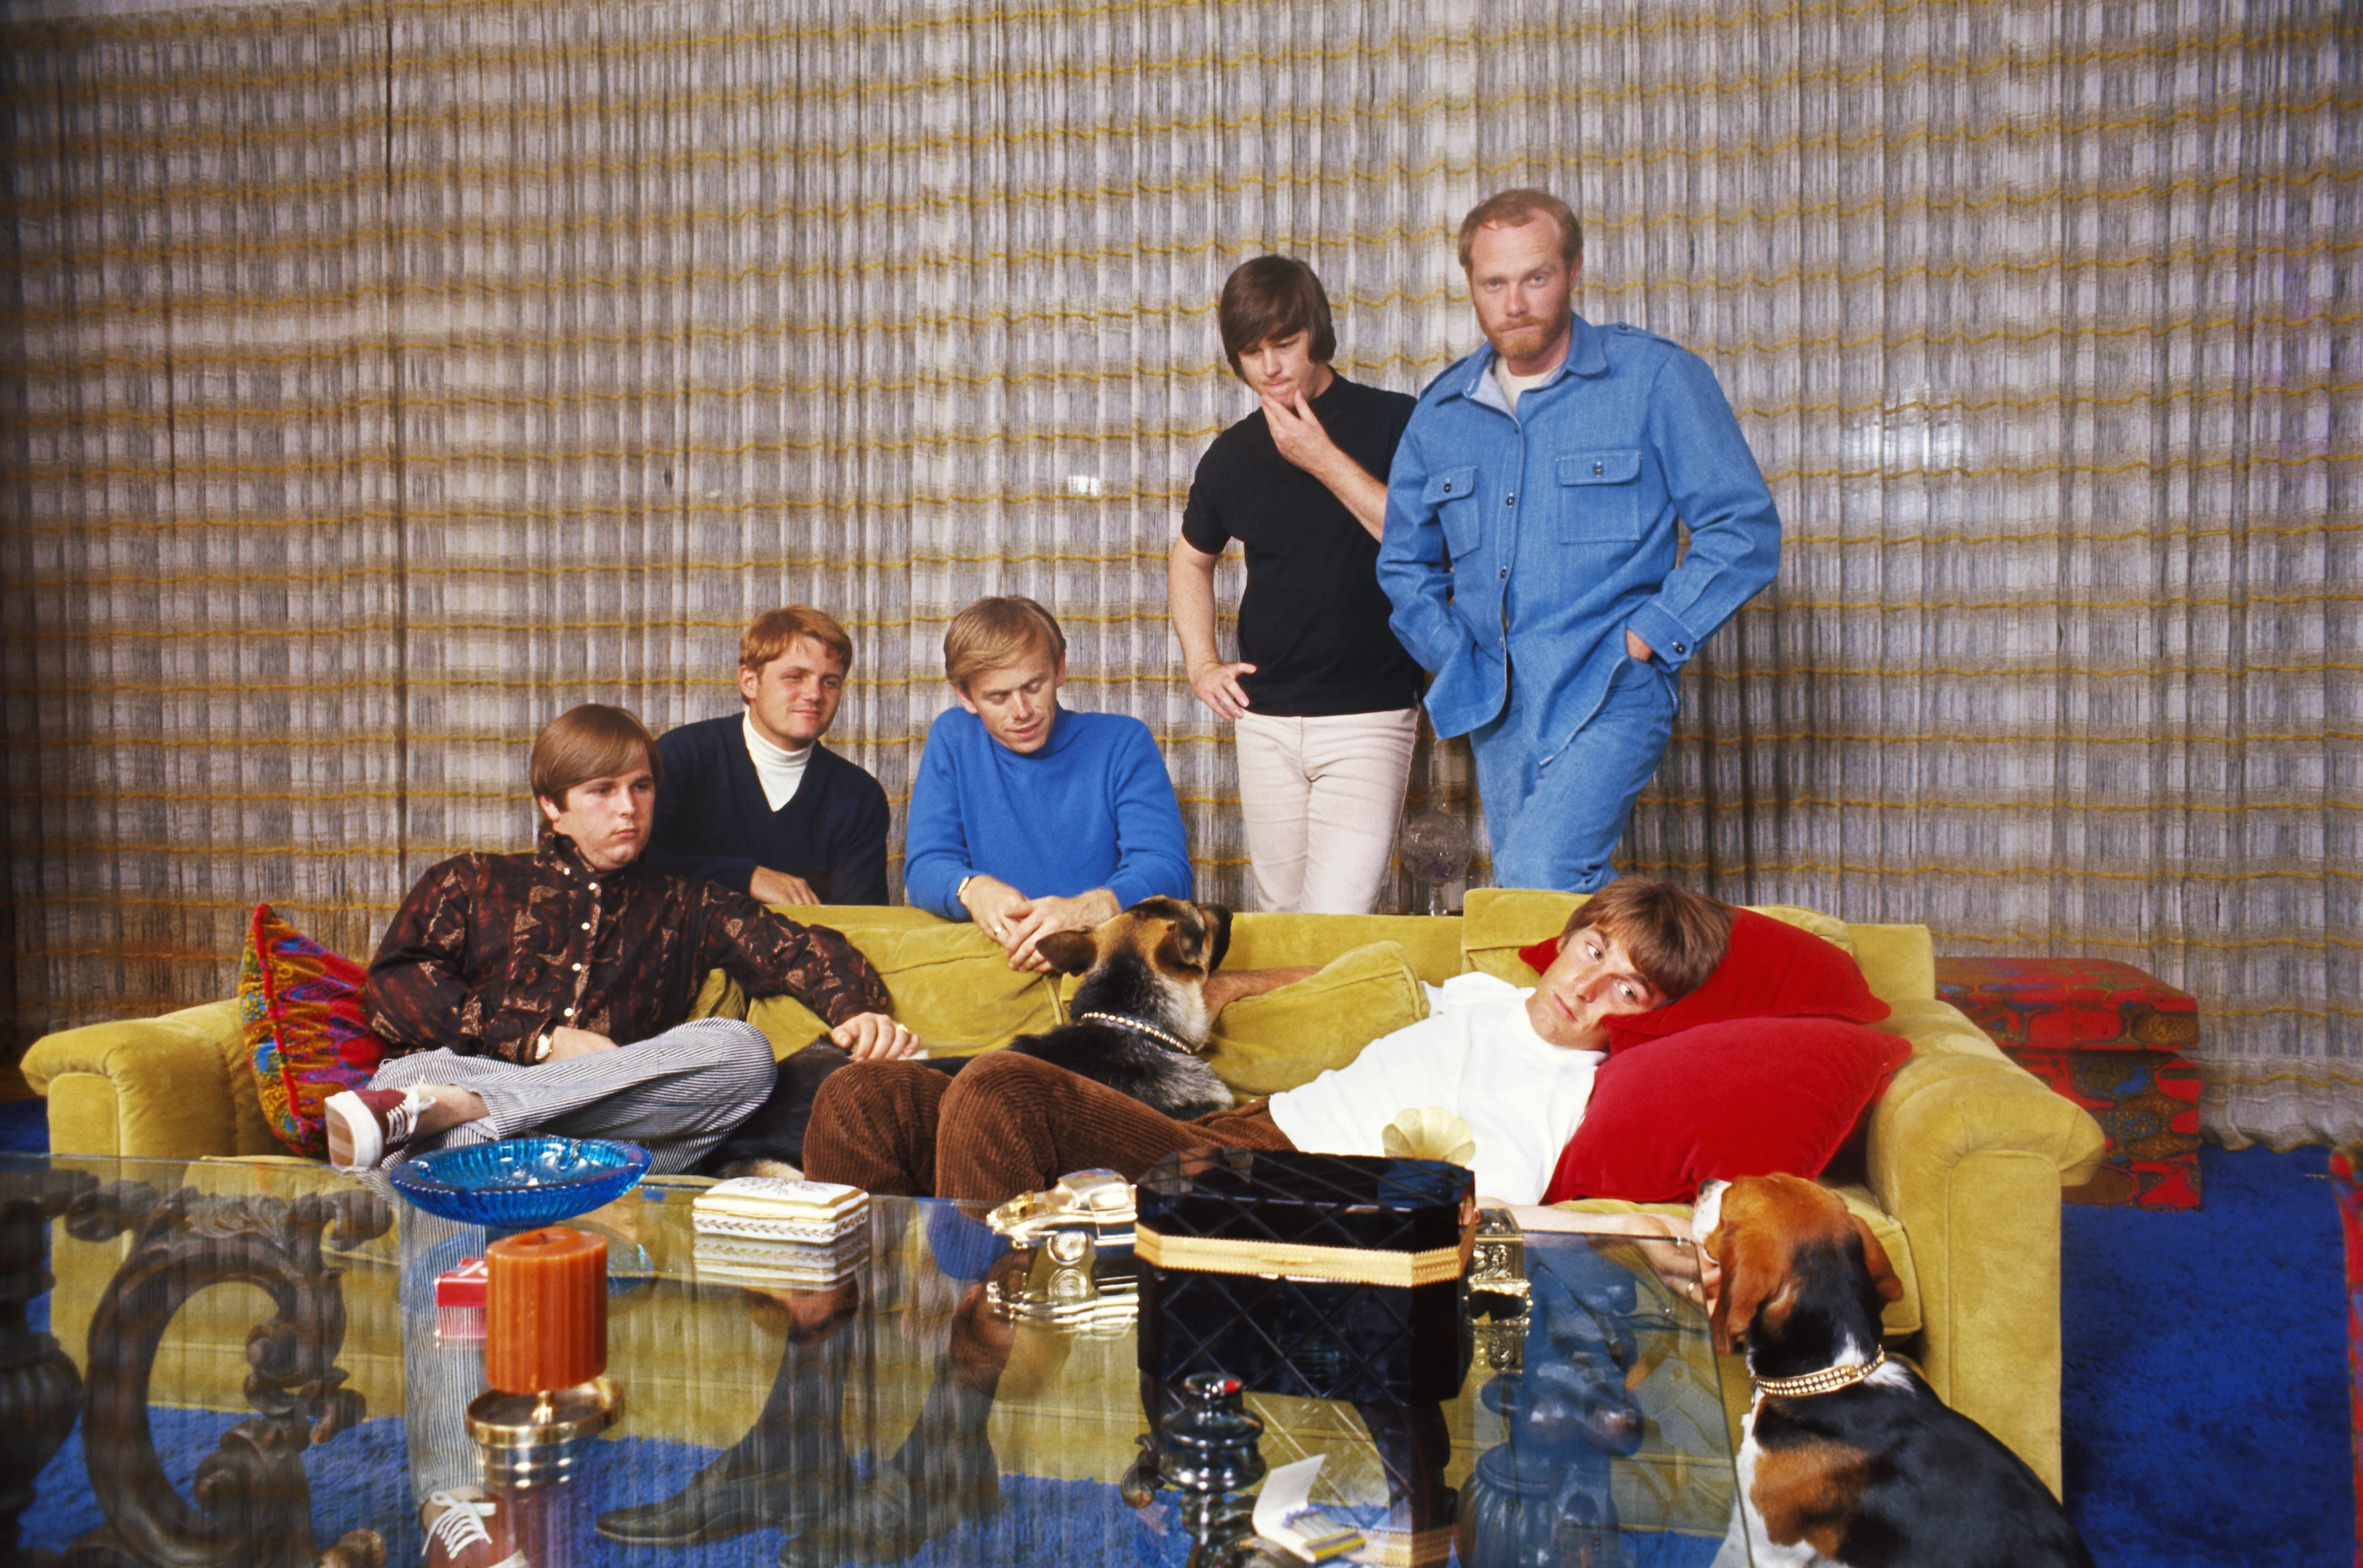 LOS ANGELES - CIRCA 1965:  Rock and roll band "The Beach Boys" pose for a portrait in a house in circa 1965 in Los Angeles, California. (L-R) Carl Wilson, Bruce Johnston, Al Jardine, Brian Wilson, Mike Love, Dennis Wilson (lying on couch). (Photo by Michael Ochs Archives/Getty Images)